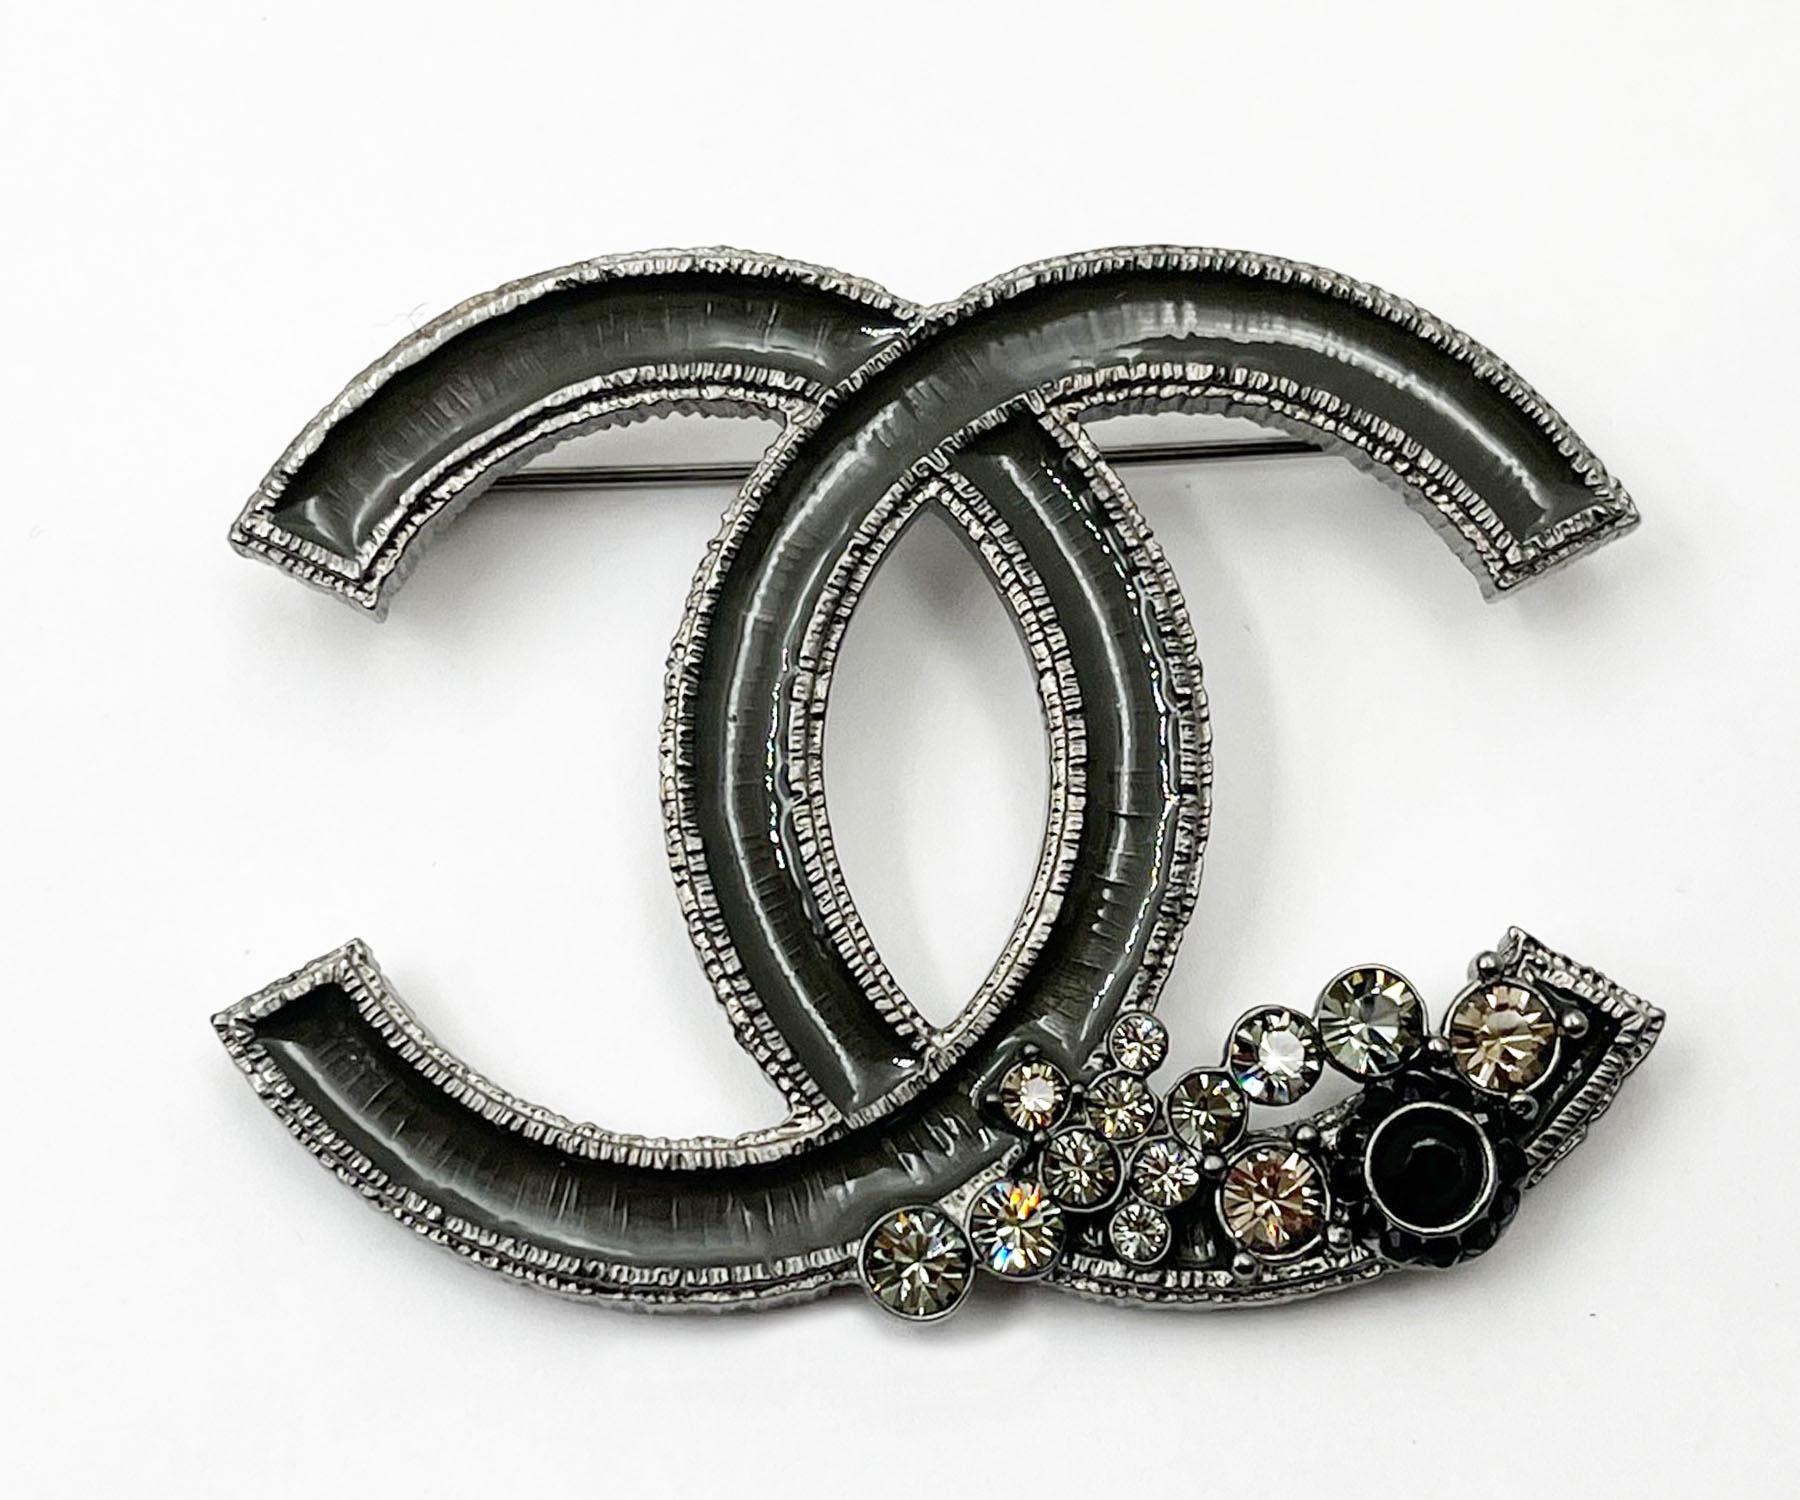 Chanel Grey Enamel CC Corner Crystals Large Brooch

*Marked 06
*Made in France
*Comes with the original box

-It is approximately 2.25